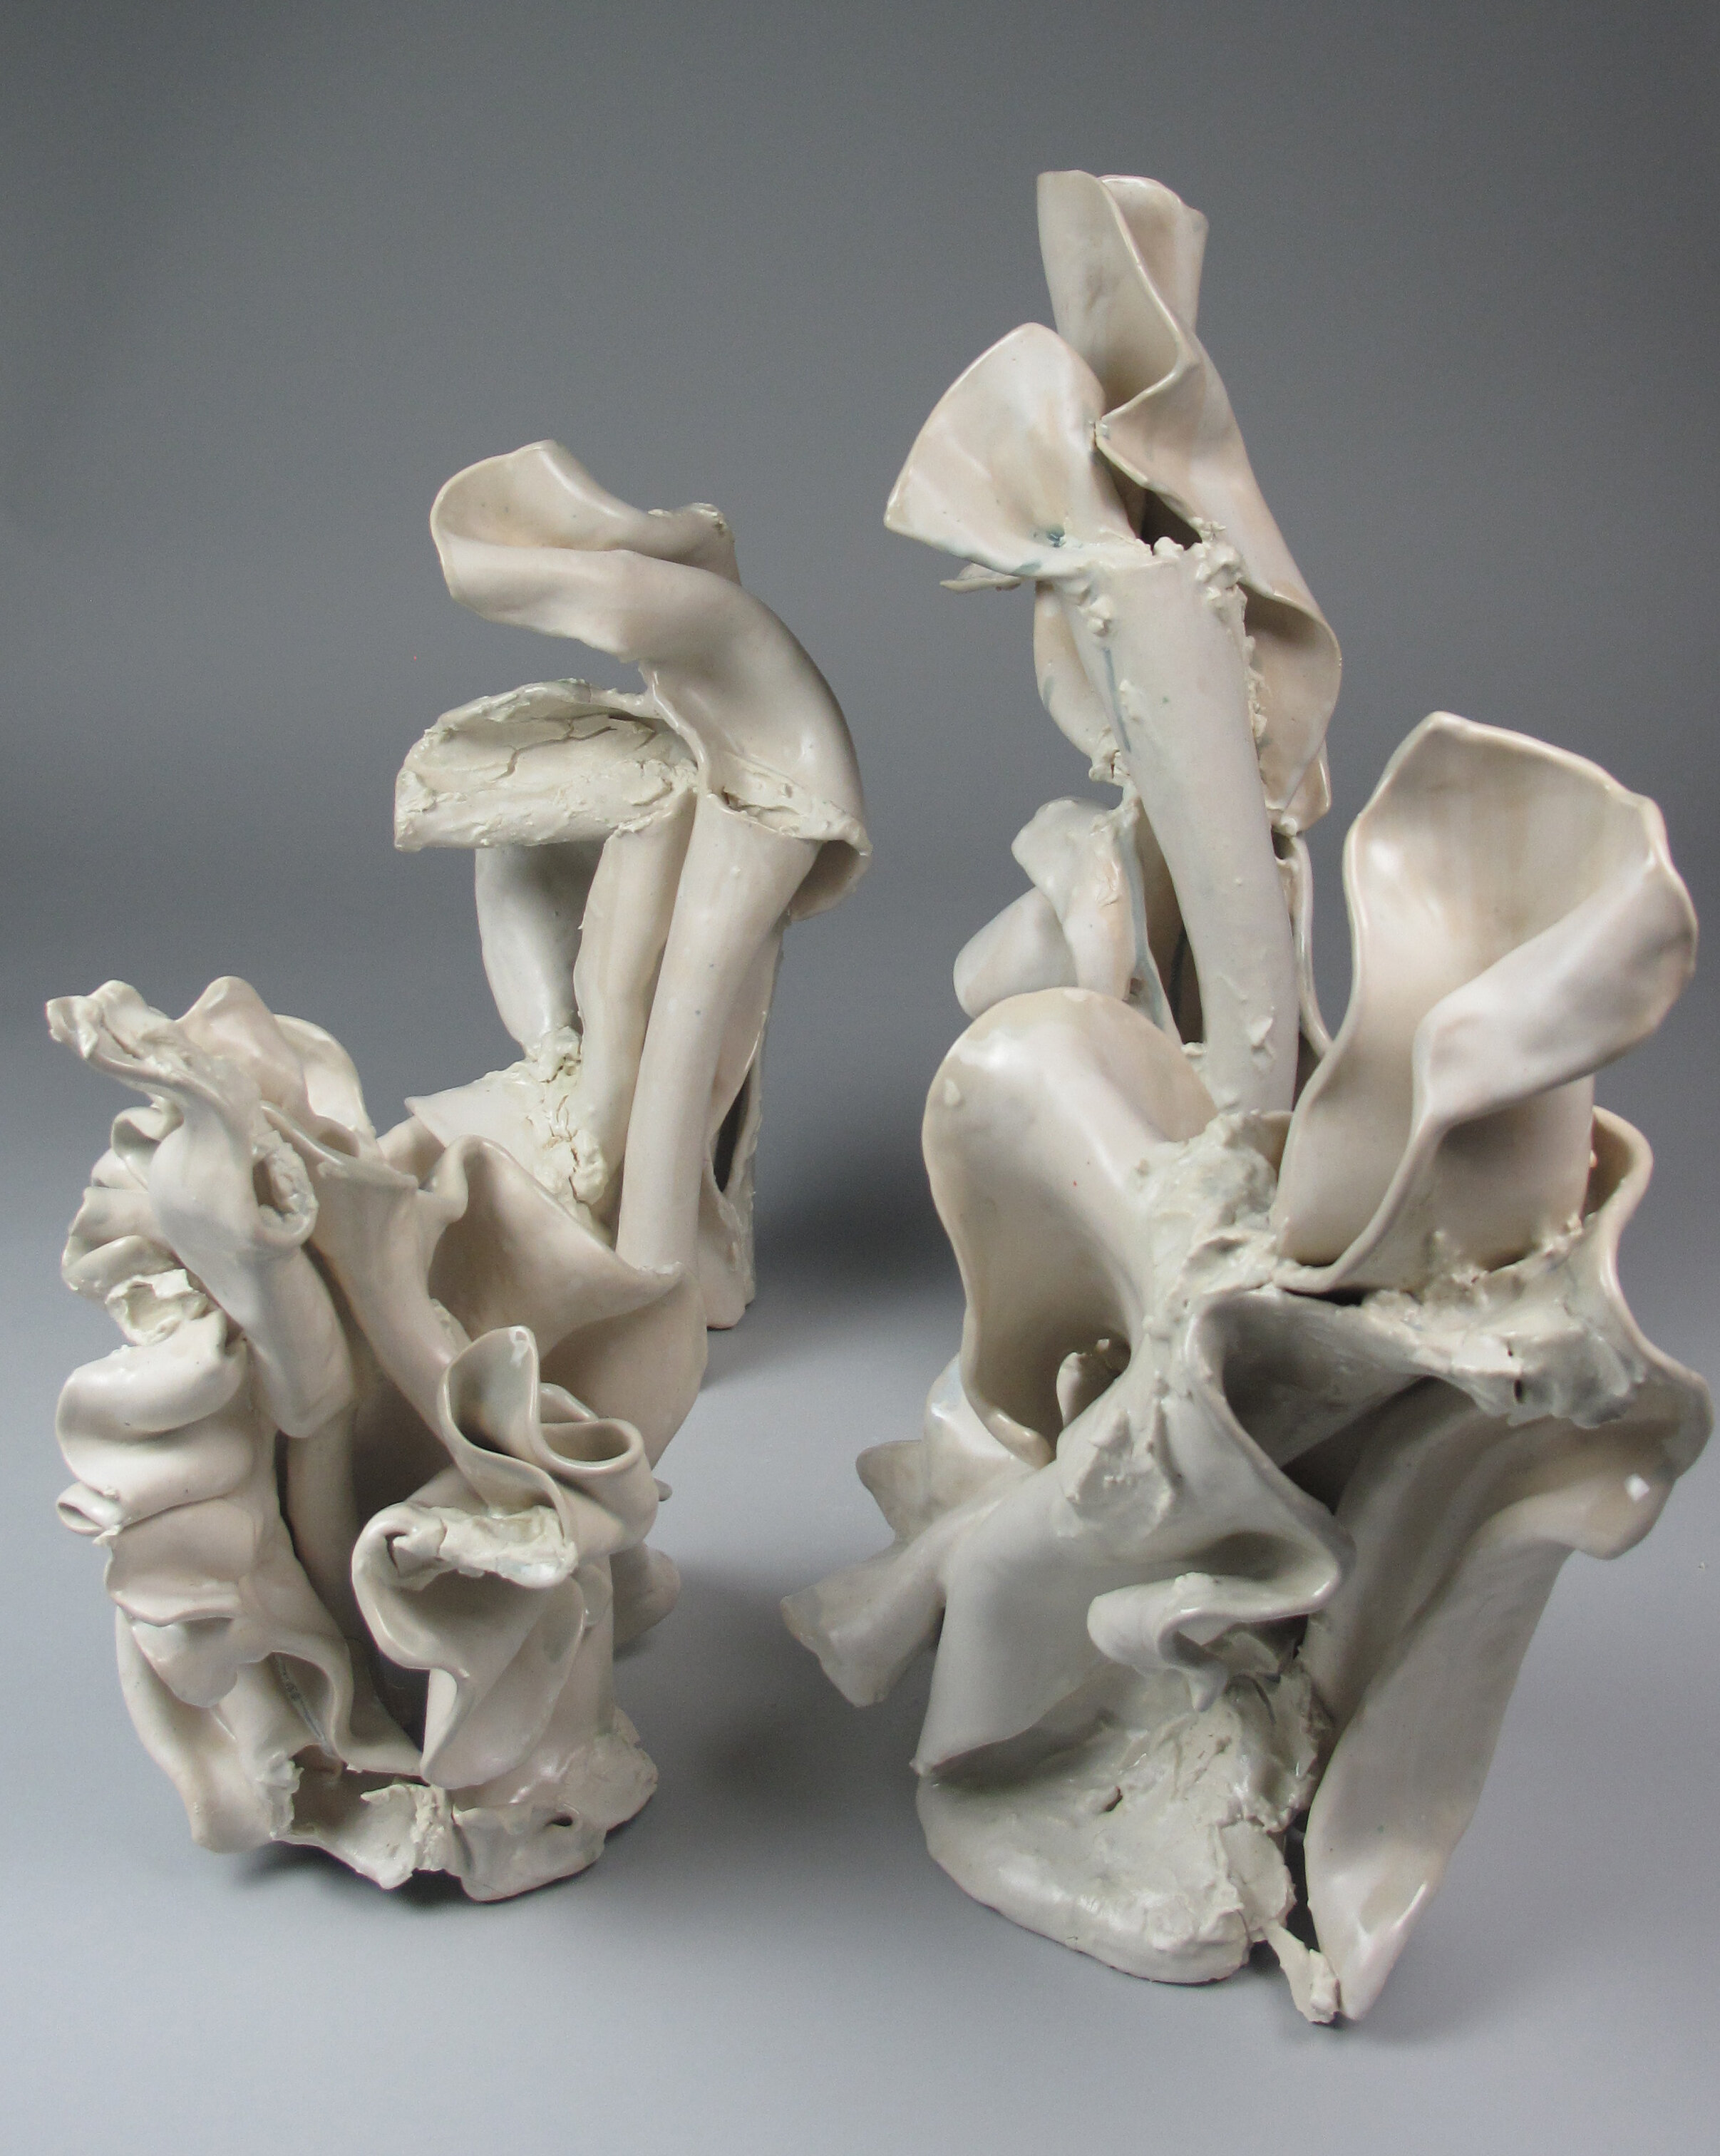  Fine-Wilson,  Bend  and  Tousle , Stoneware 